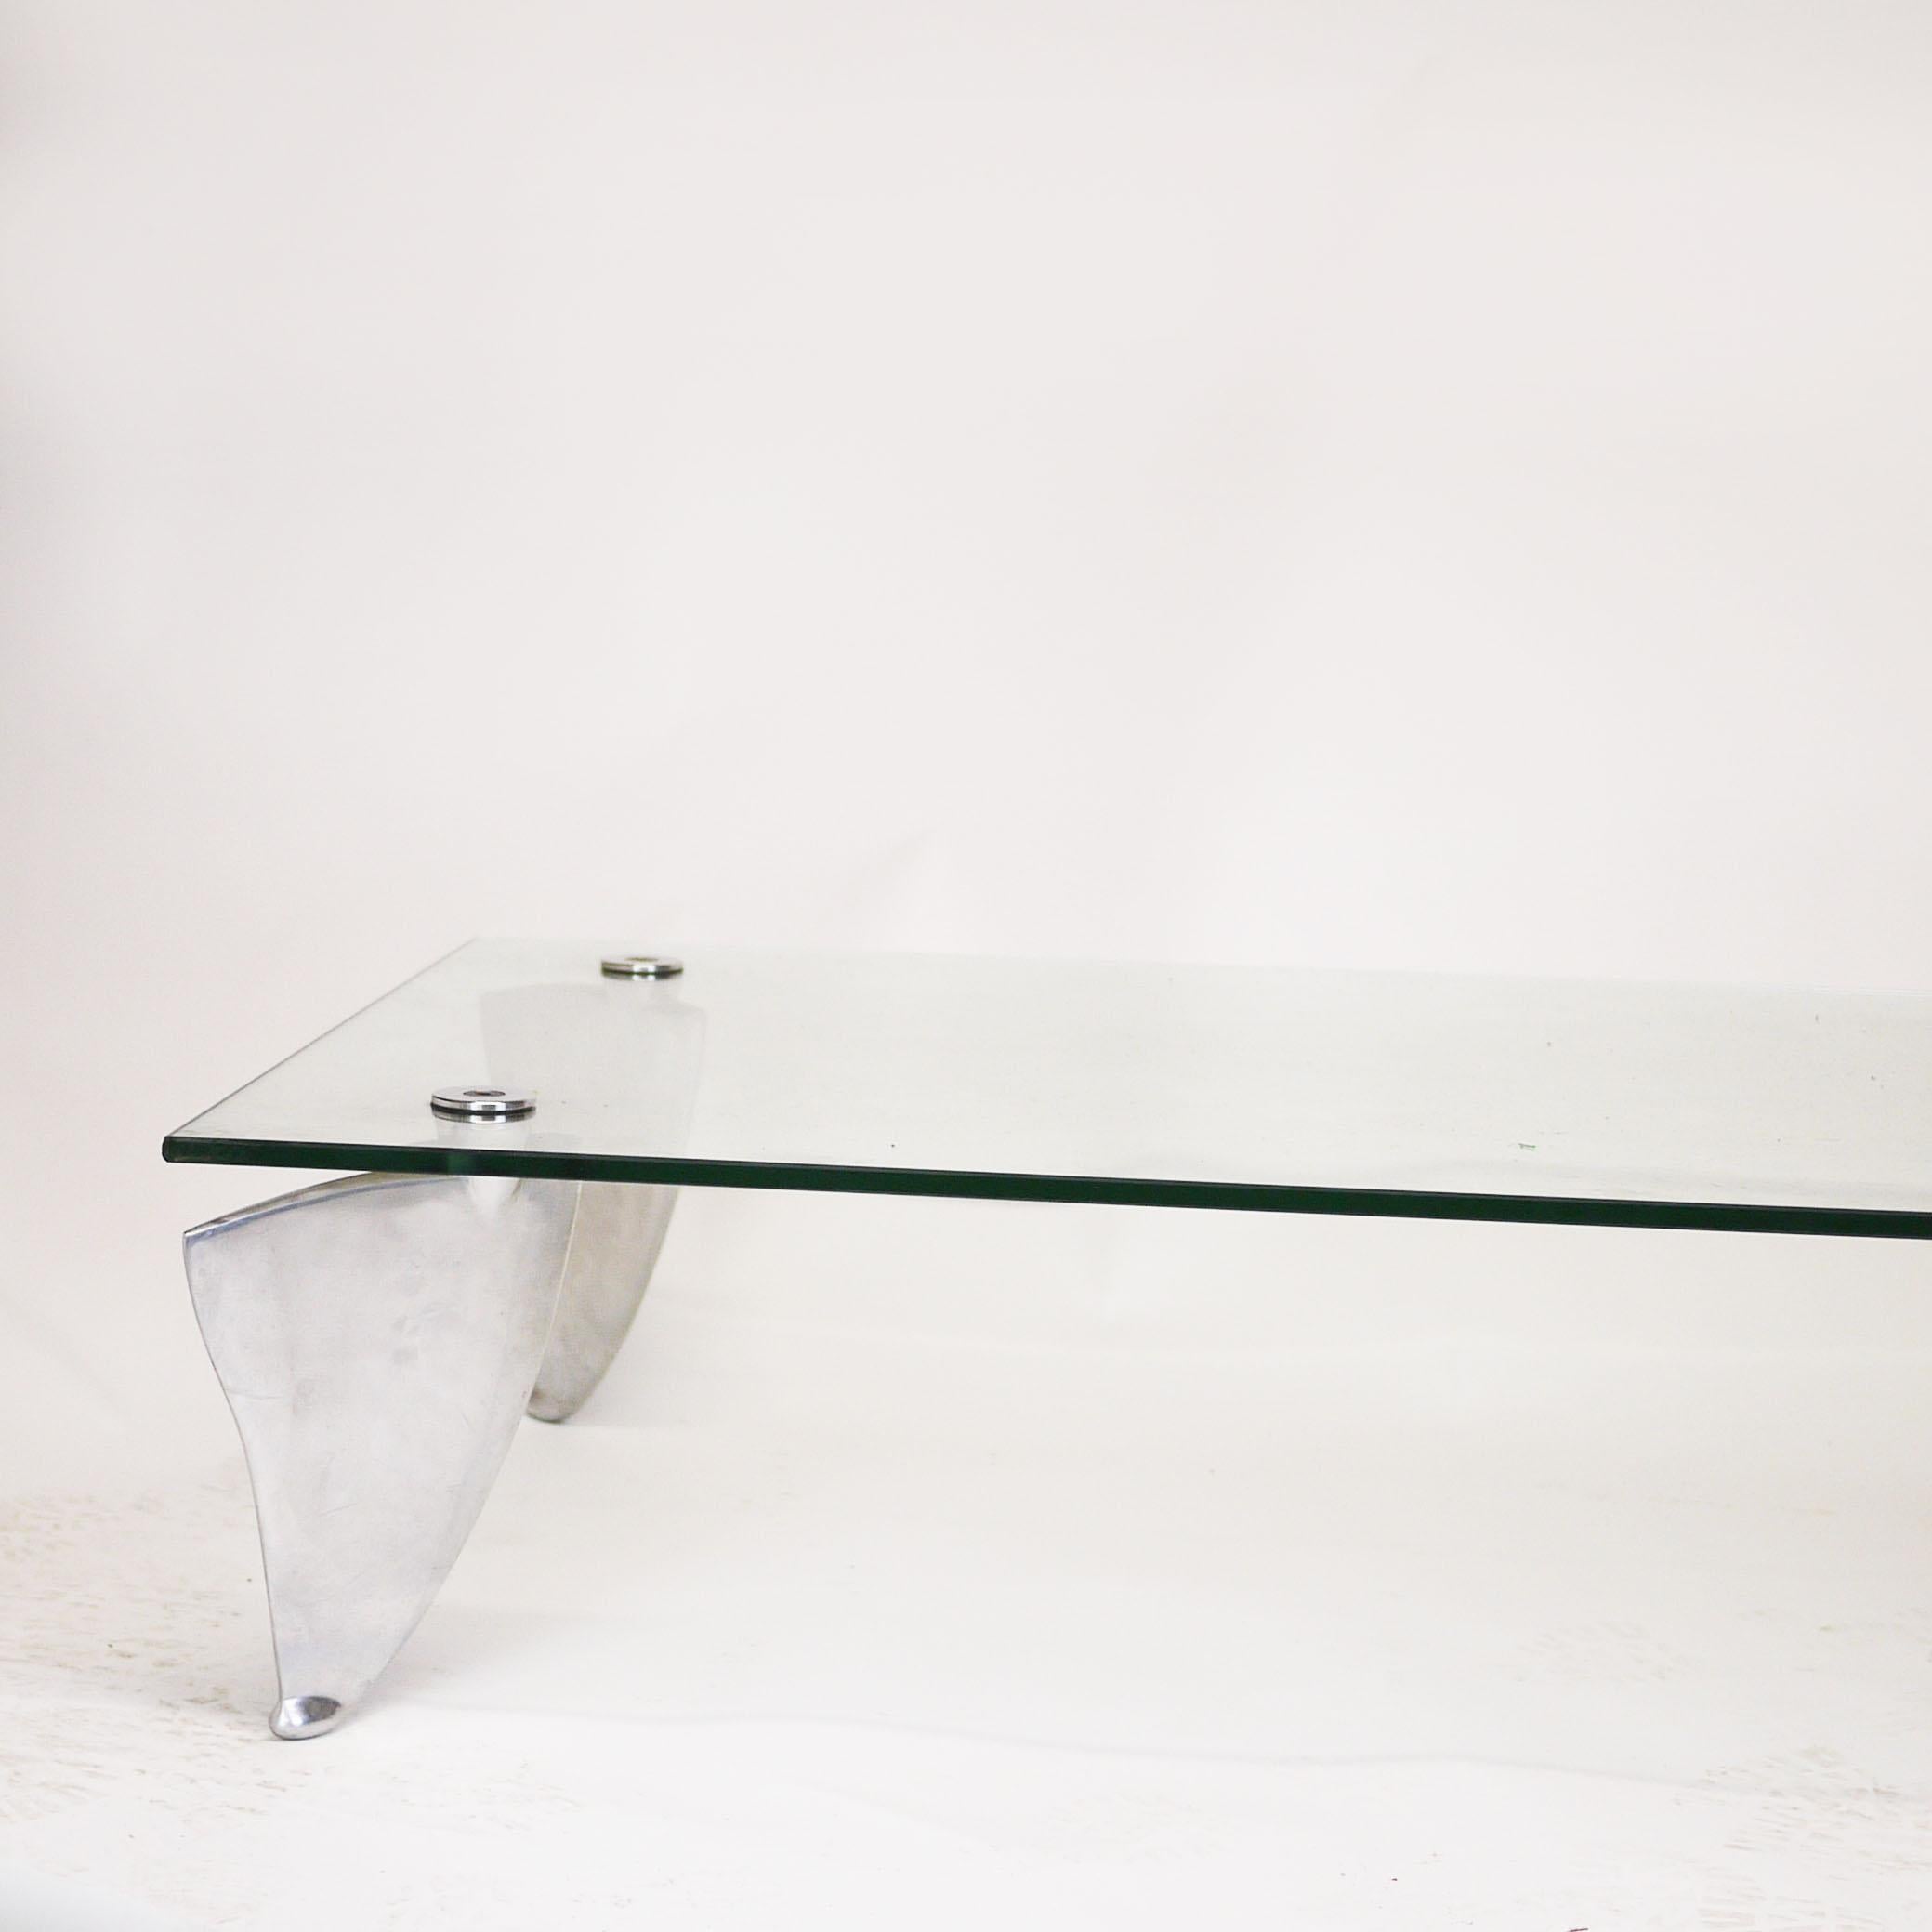 Vintage Glass and Aluminum 'Fipper' Coffee Table by Matthew Hilton for SCP, 1980 For Sale 7